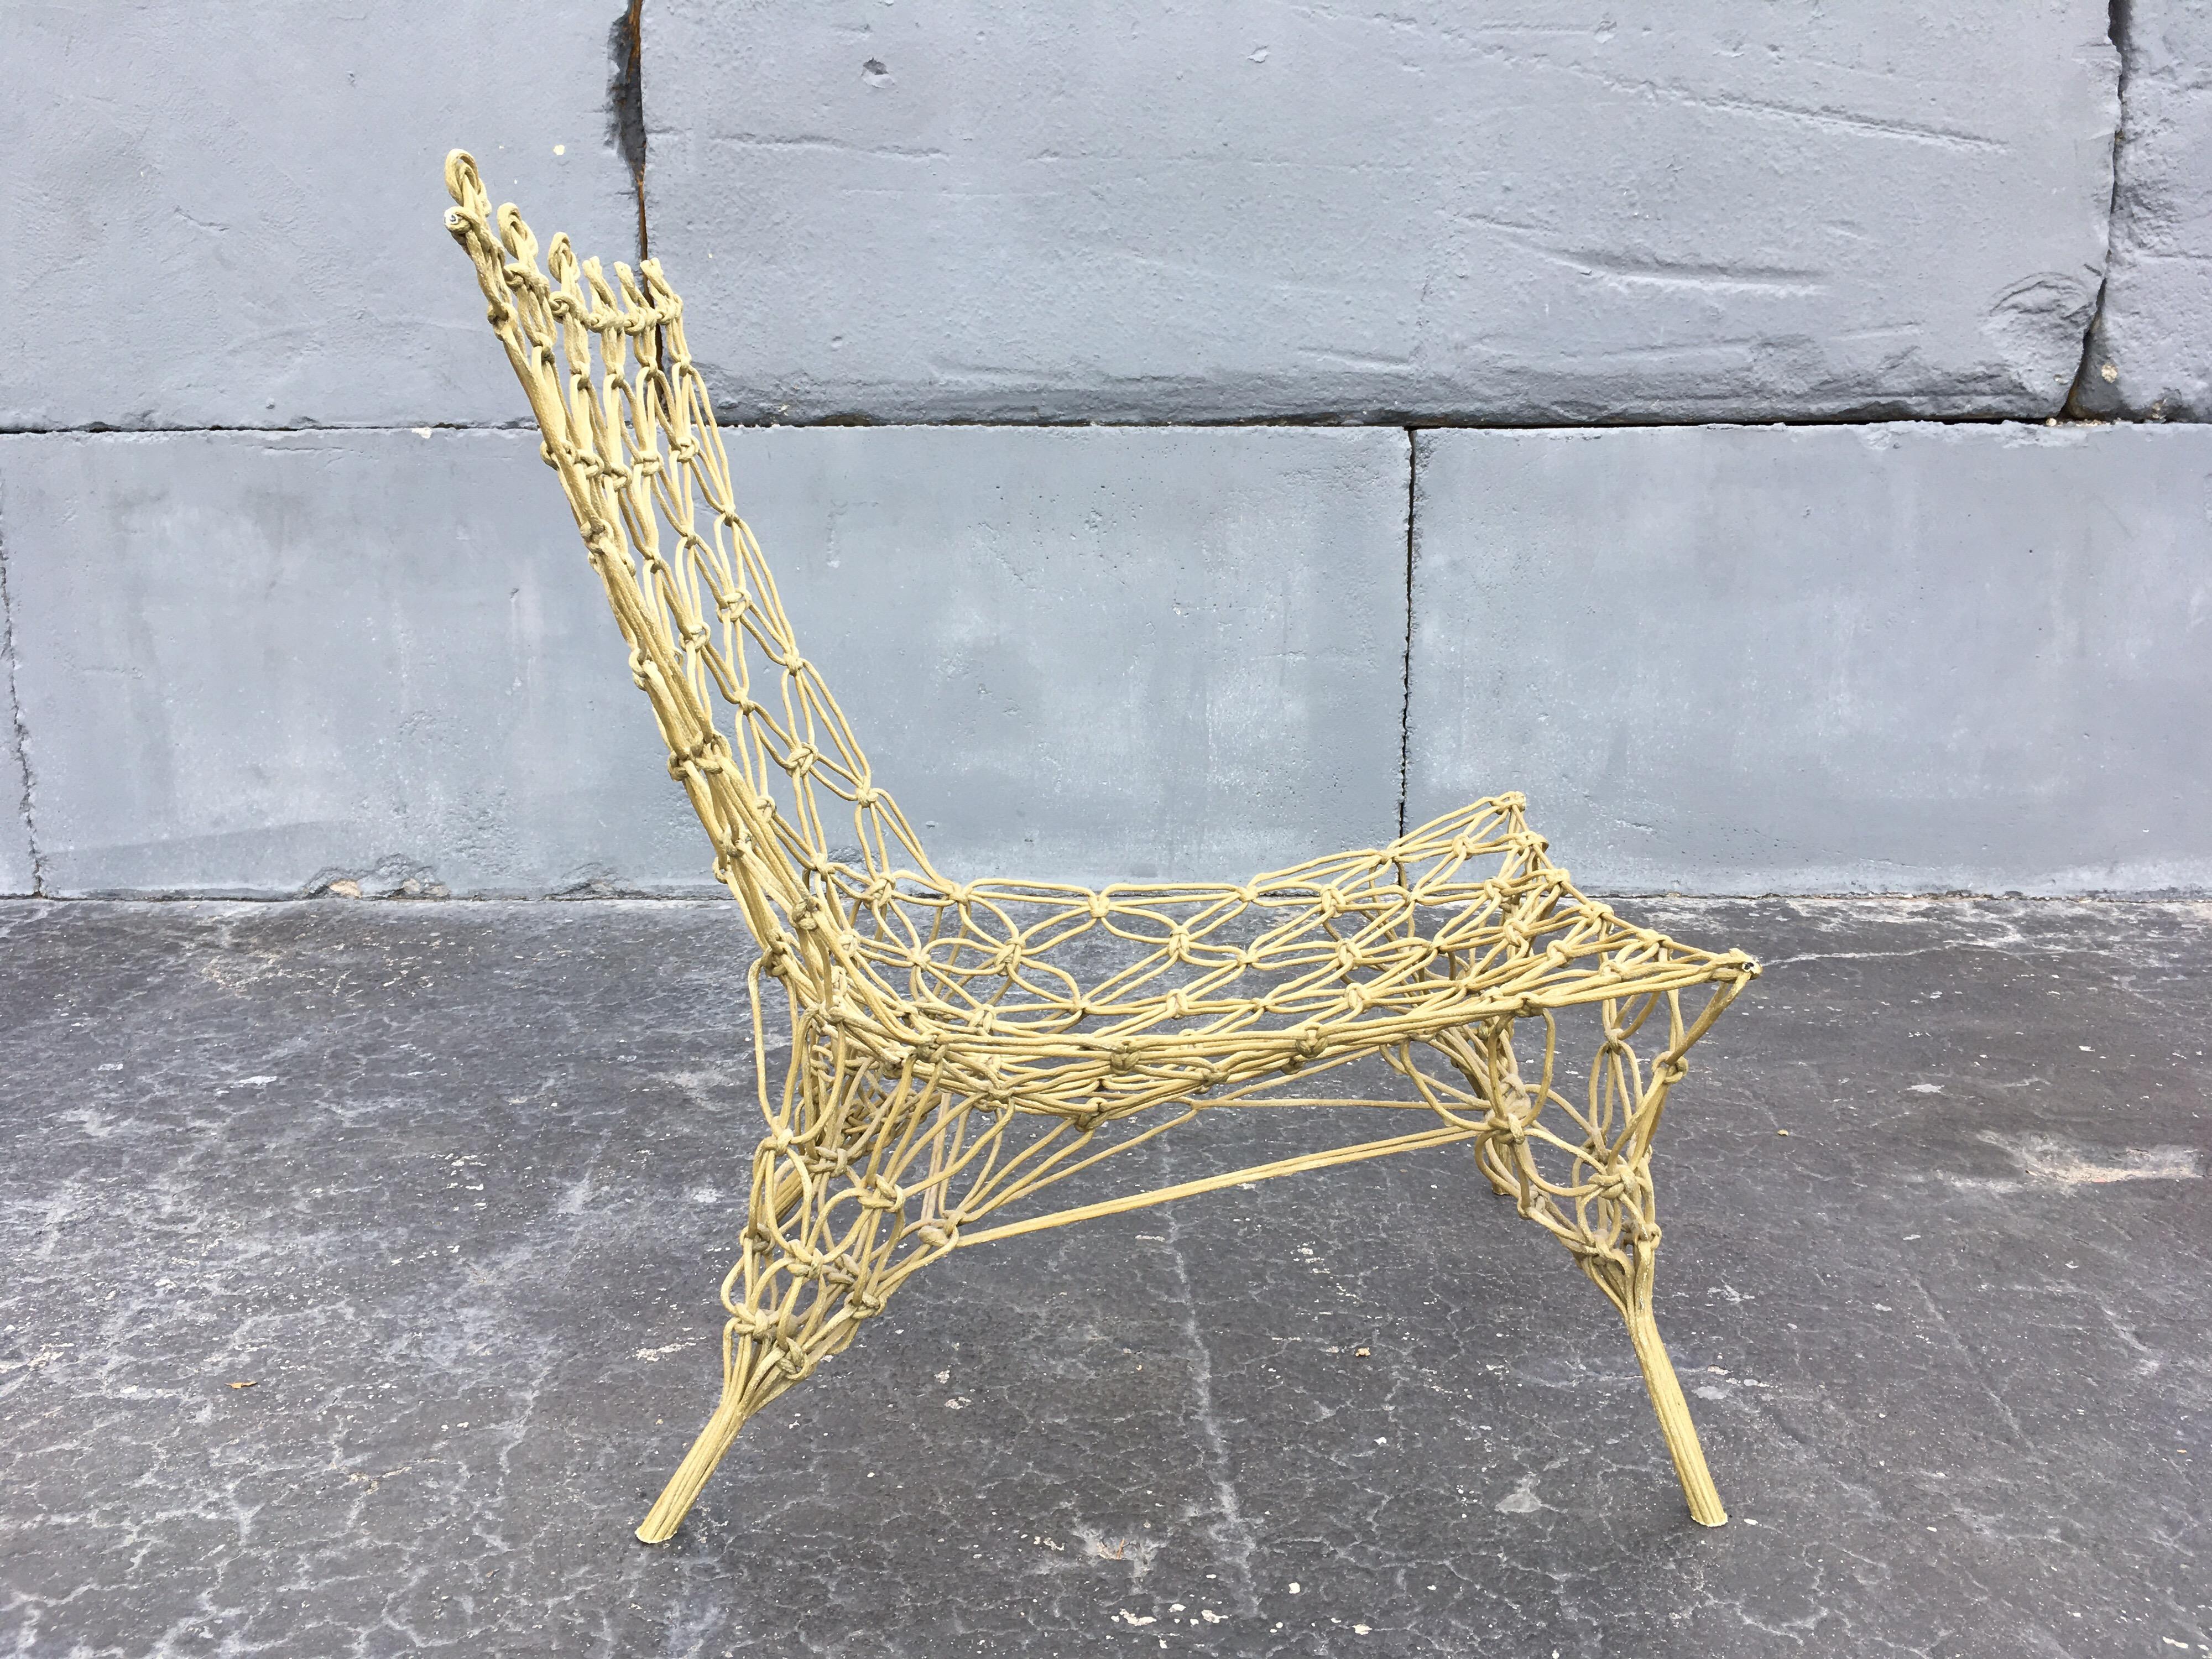 Modern Marcel Wanders “Knotted” Chair